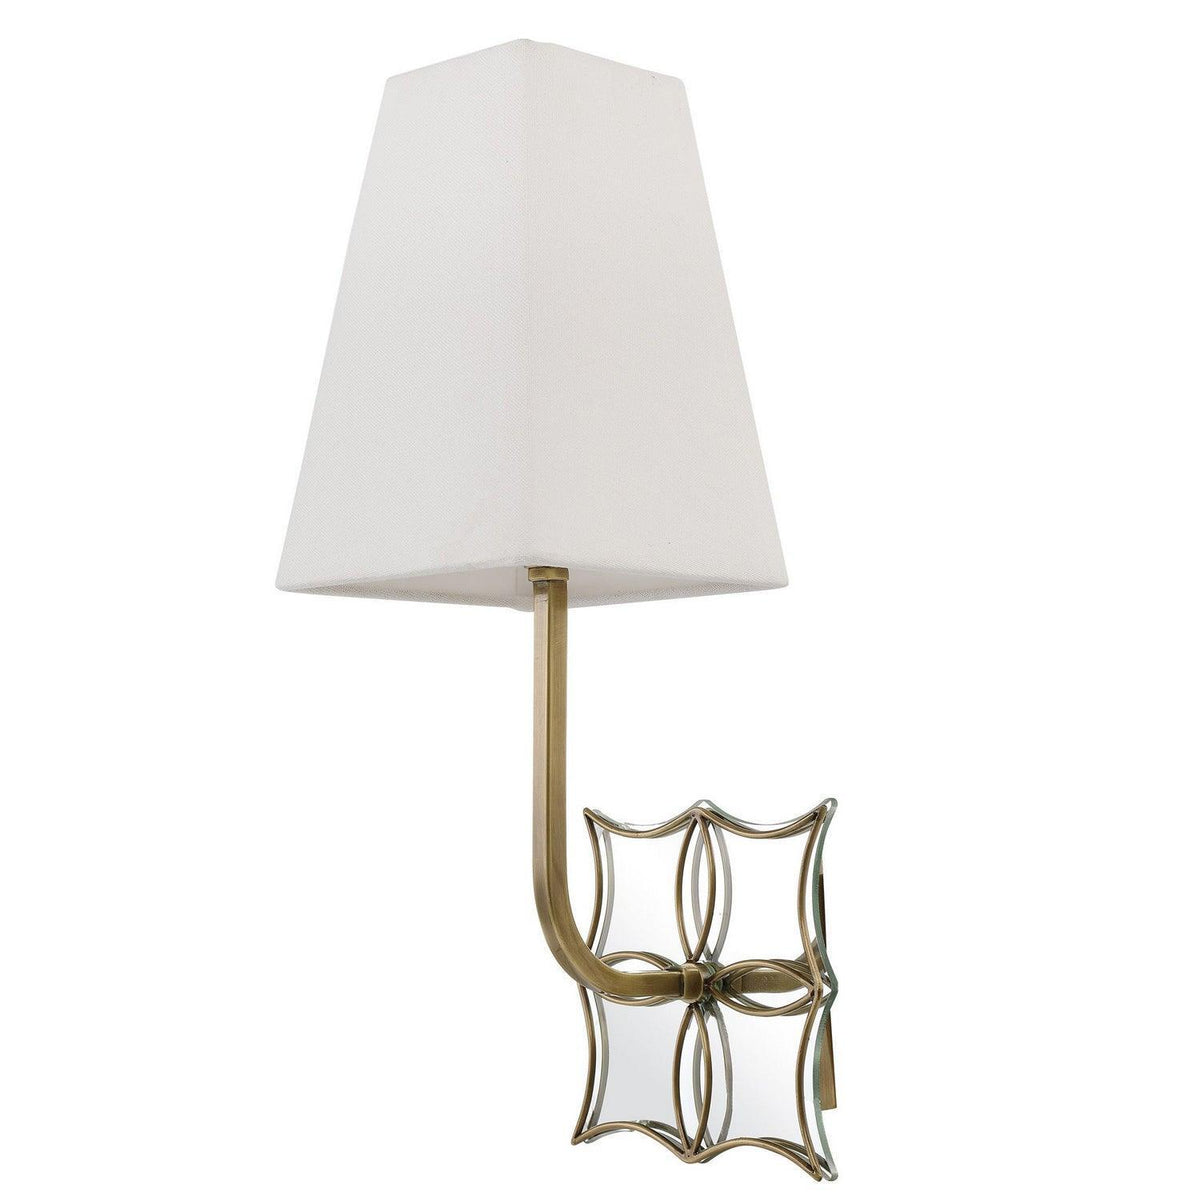 The Uttermost - Theodora One Light Wall Sconce - 22543 | Montreal Lighting & Hardware